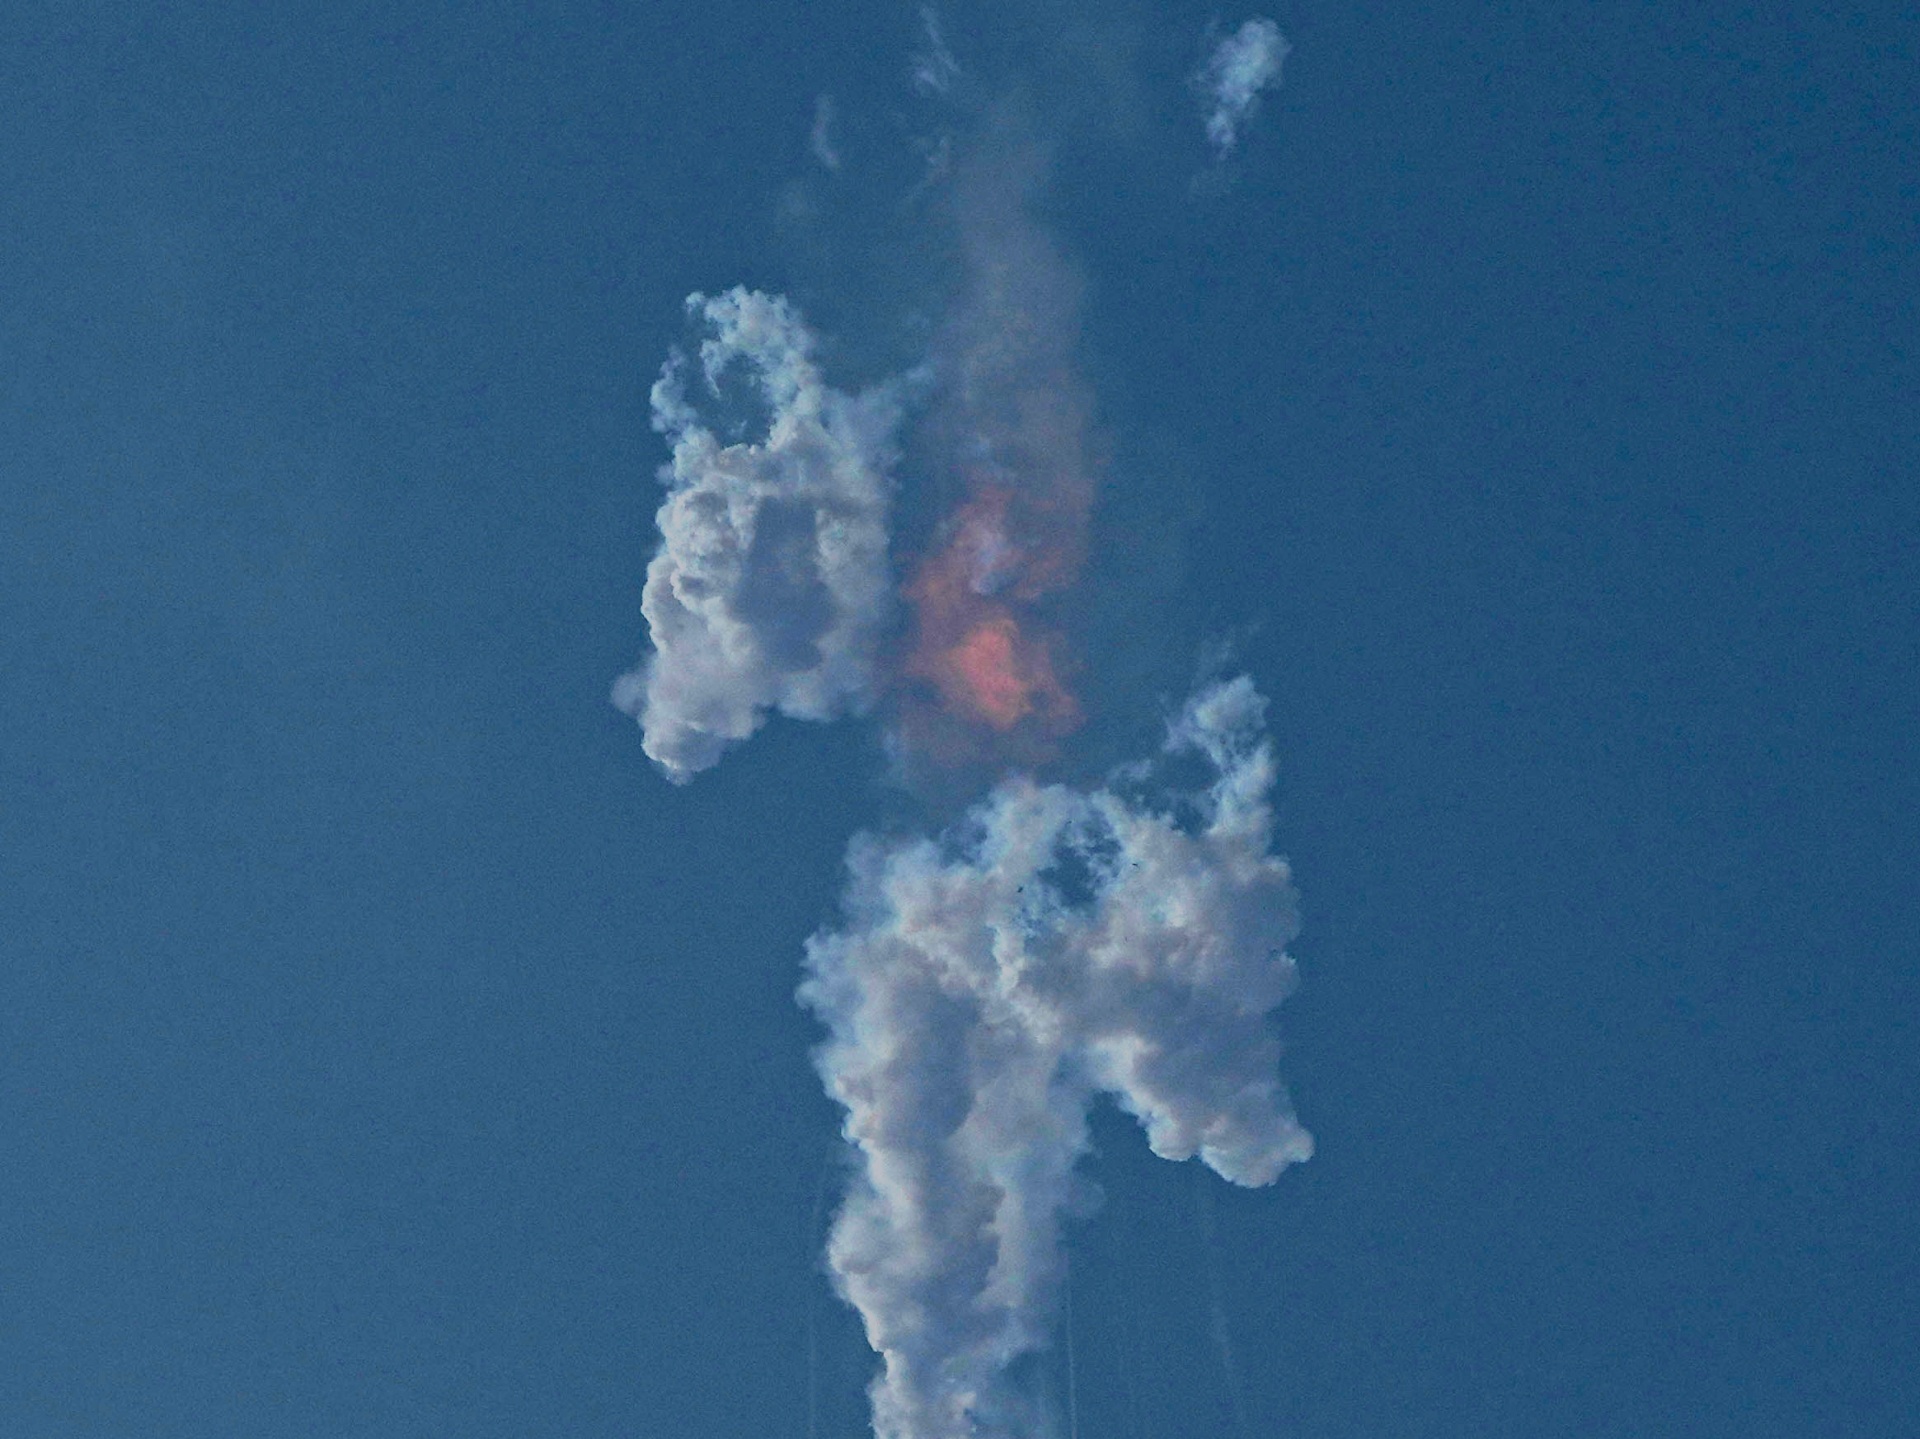 Elon Musk's SpaceX Launches Starship Rocket, Suffers Mid-Flight Failure